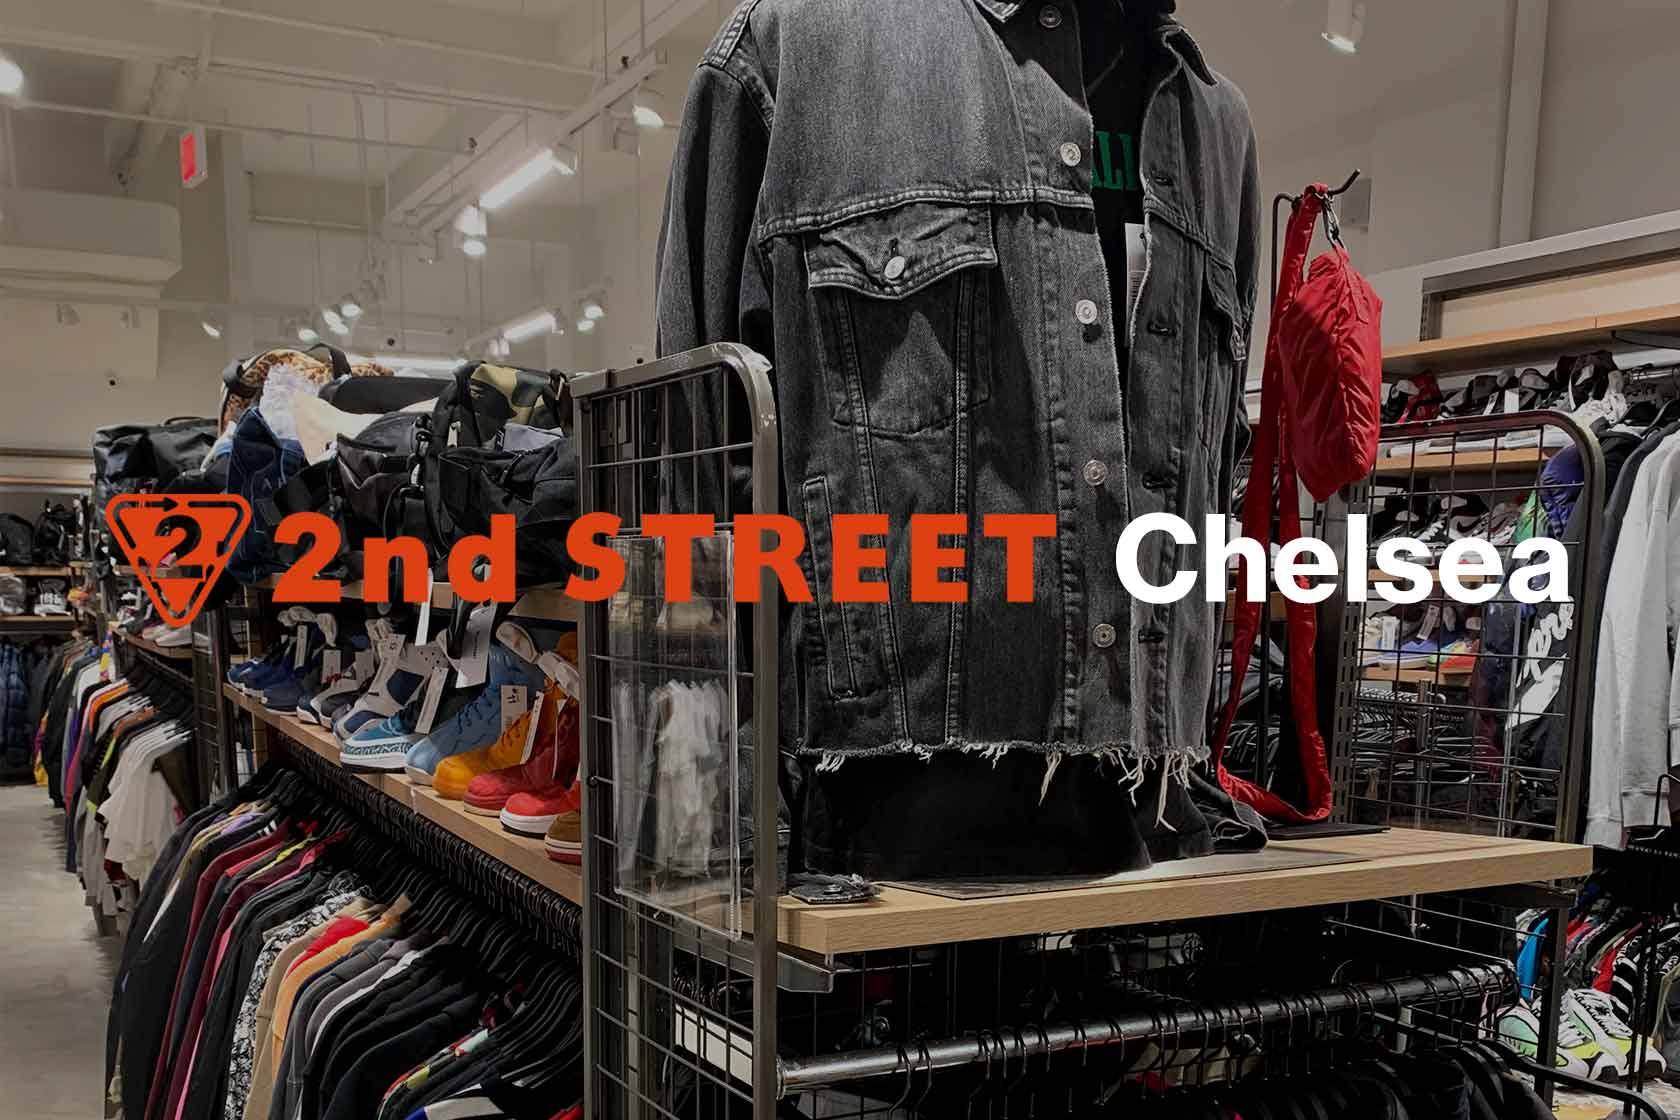 2nd STREET USA, Second Hand Clothing Store - Buy & Sell Clothes